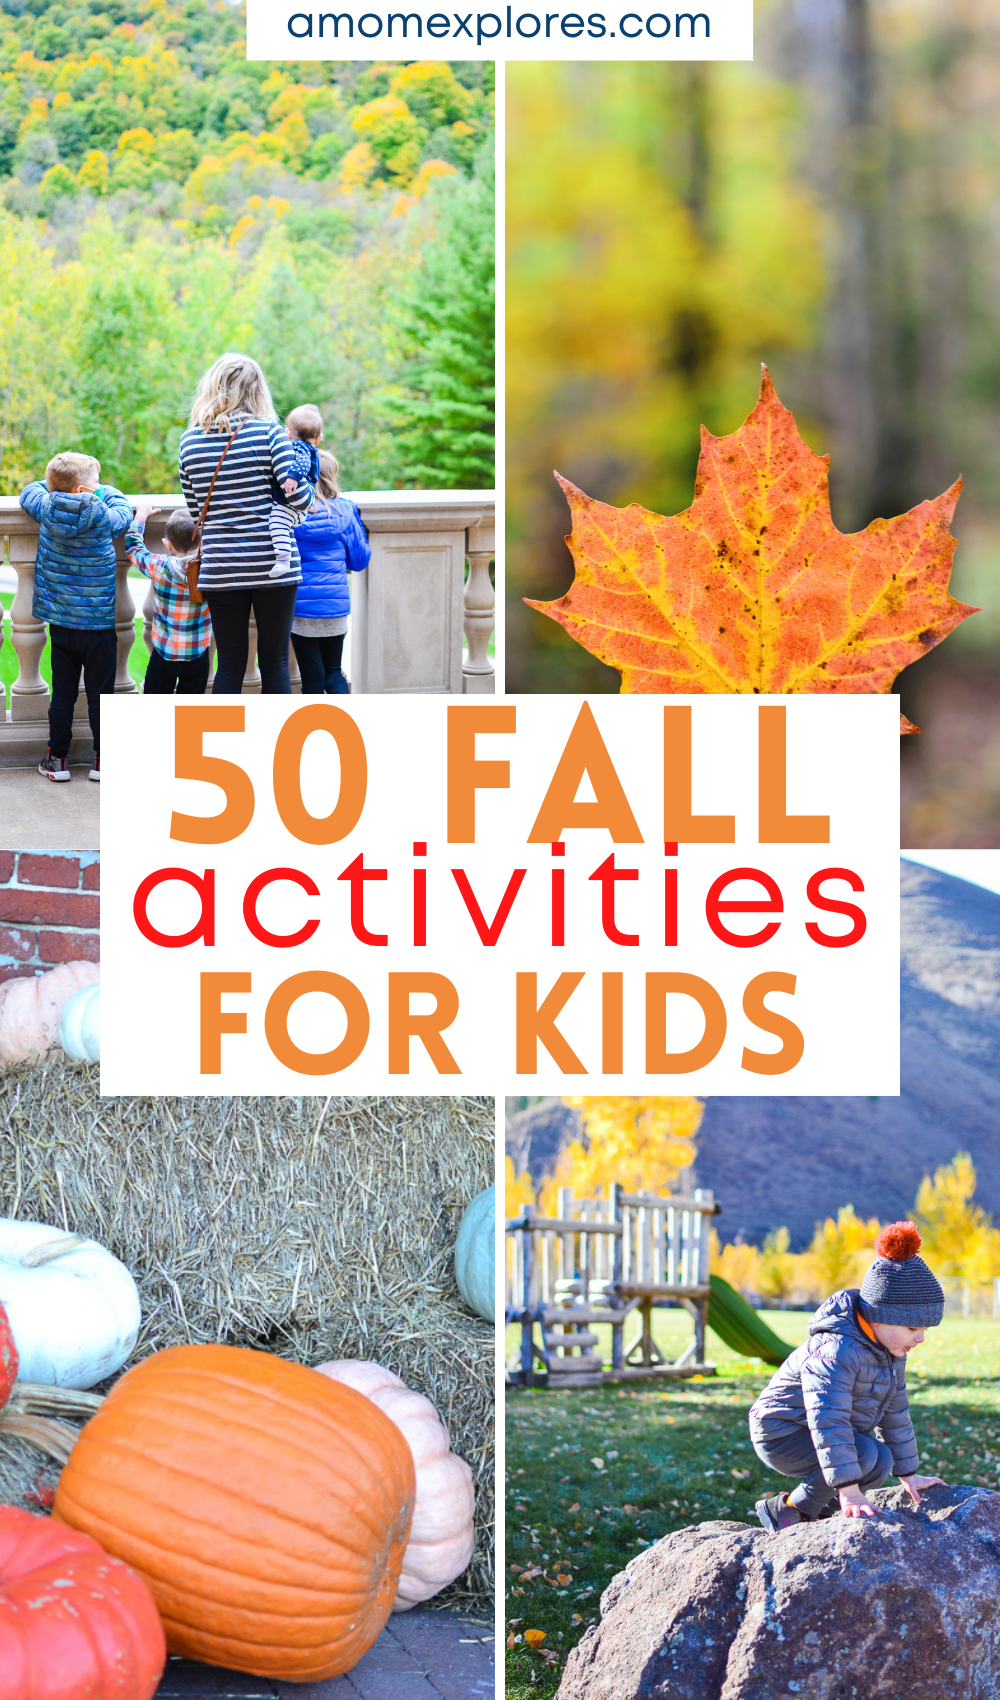 50 fall activities for kids.png